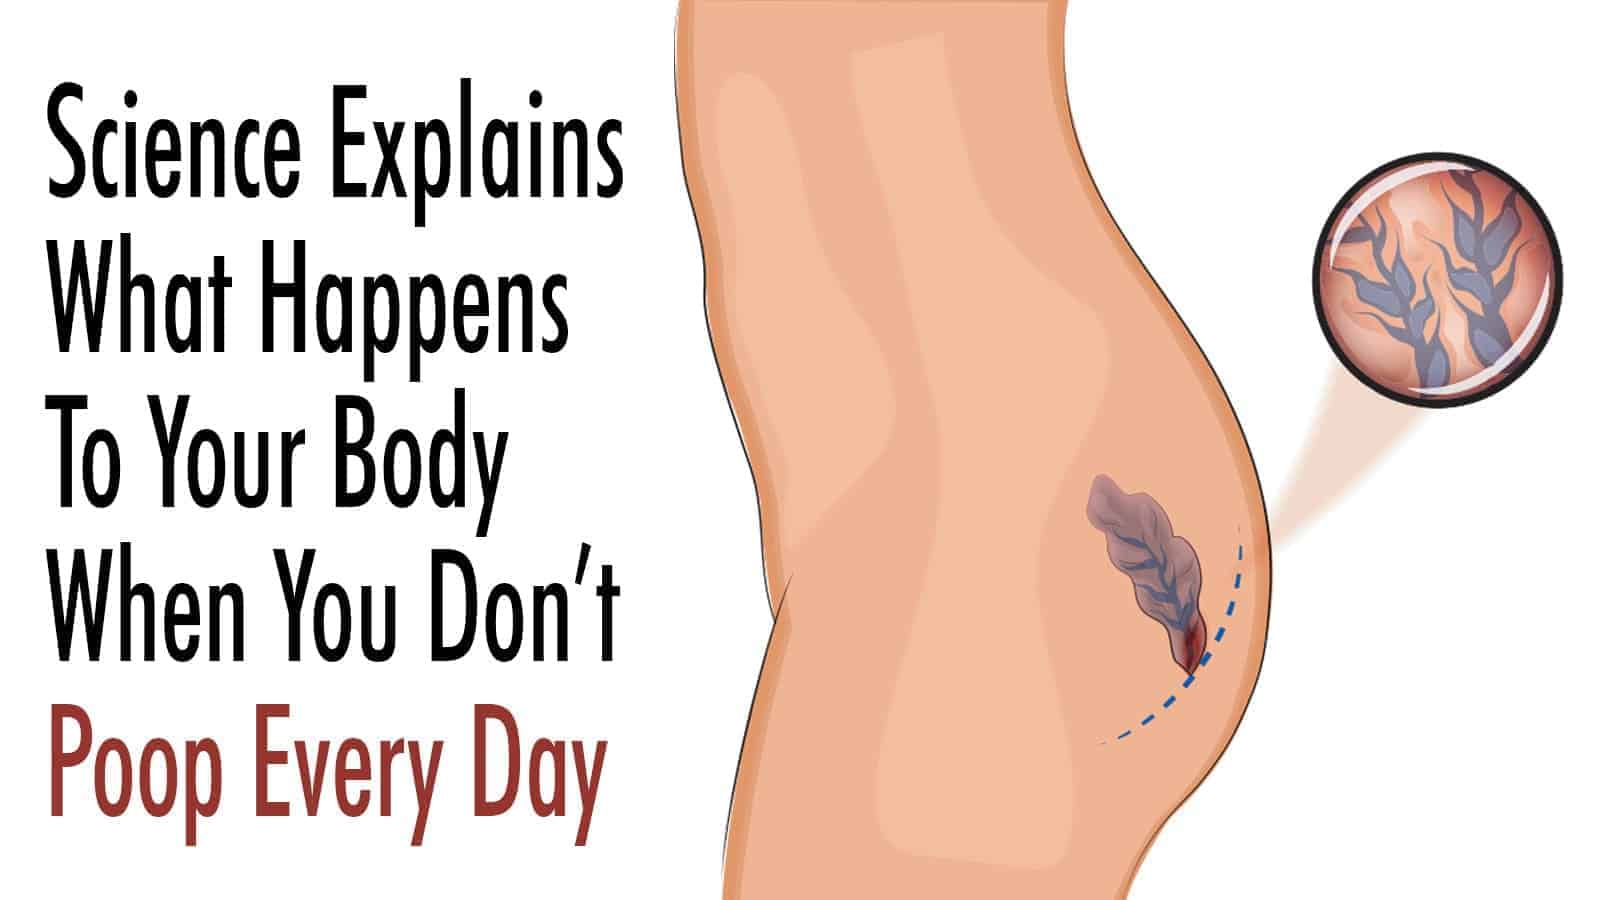 Science Explains What Happens To Your Body When You Don’t Poop Every Day.